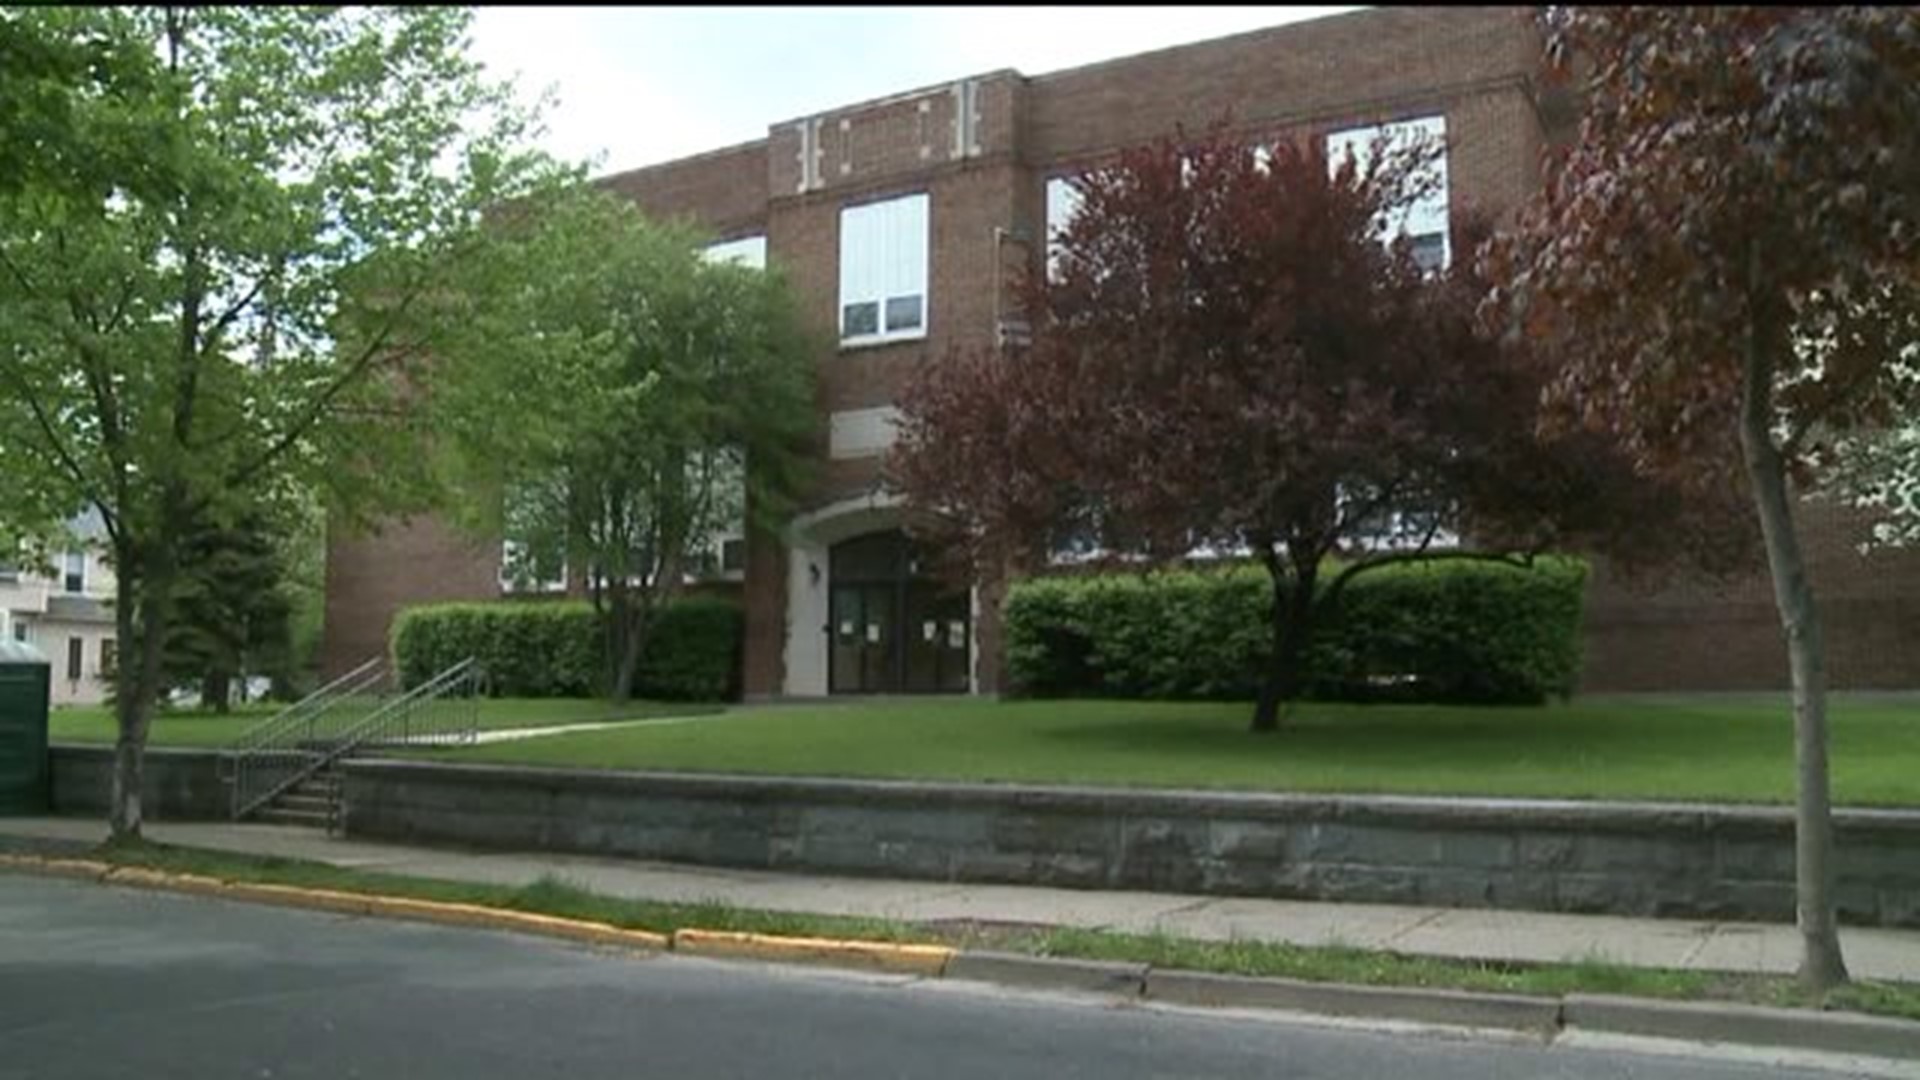 Lawsuit Filed to Save School